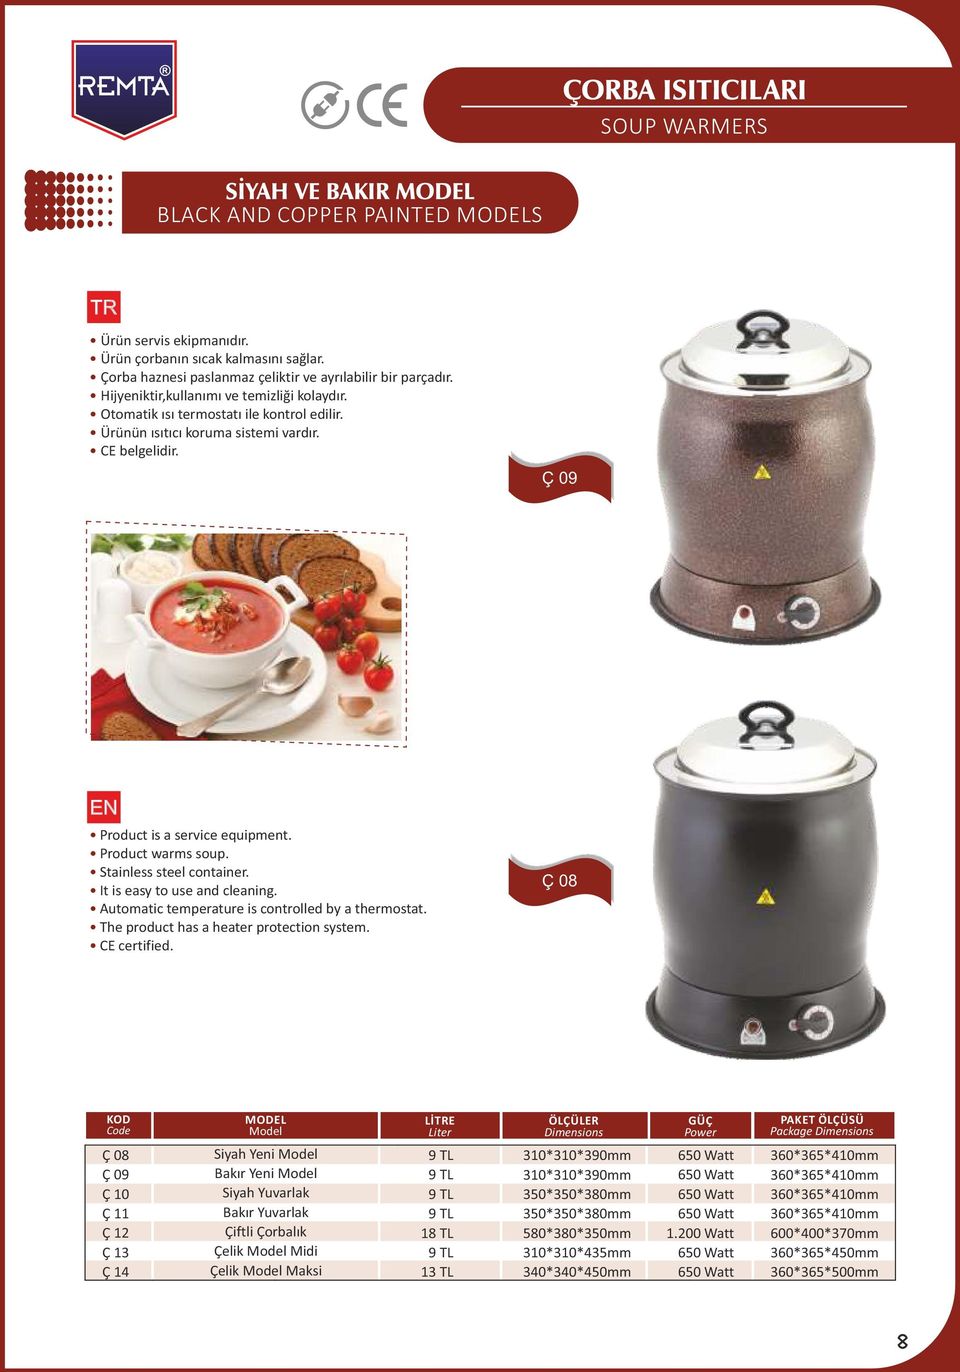 ST Ç 09 11 Product is a service equipment. Product warms soup. Stainless steel container. It is easy to use and cleaning. Automatic temperature is controlled by a thermostat.